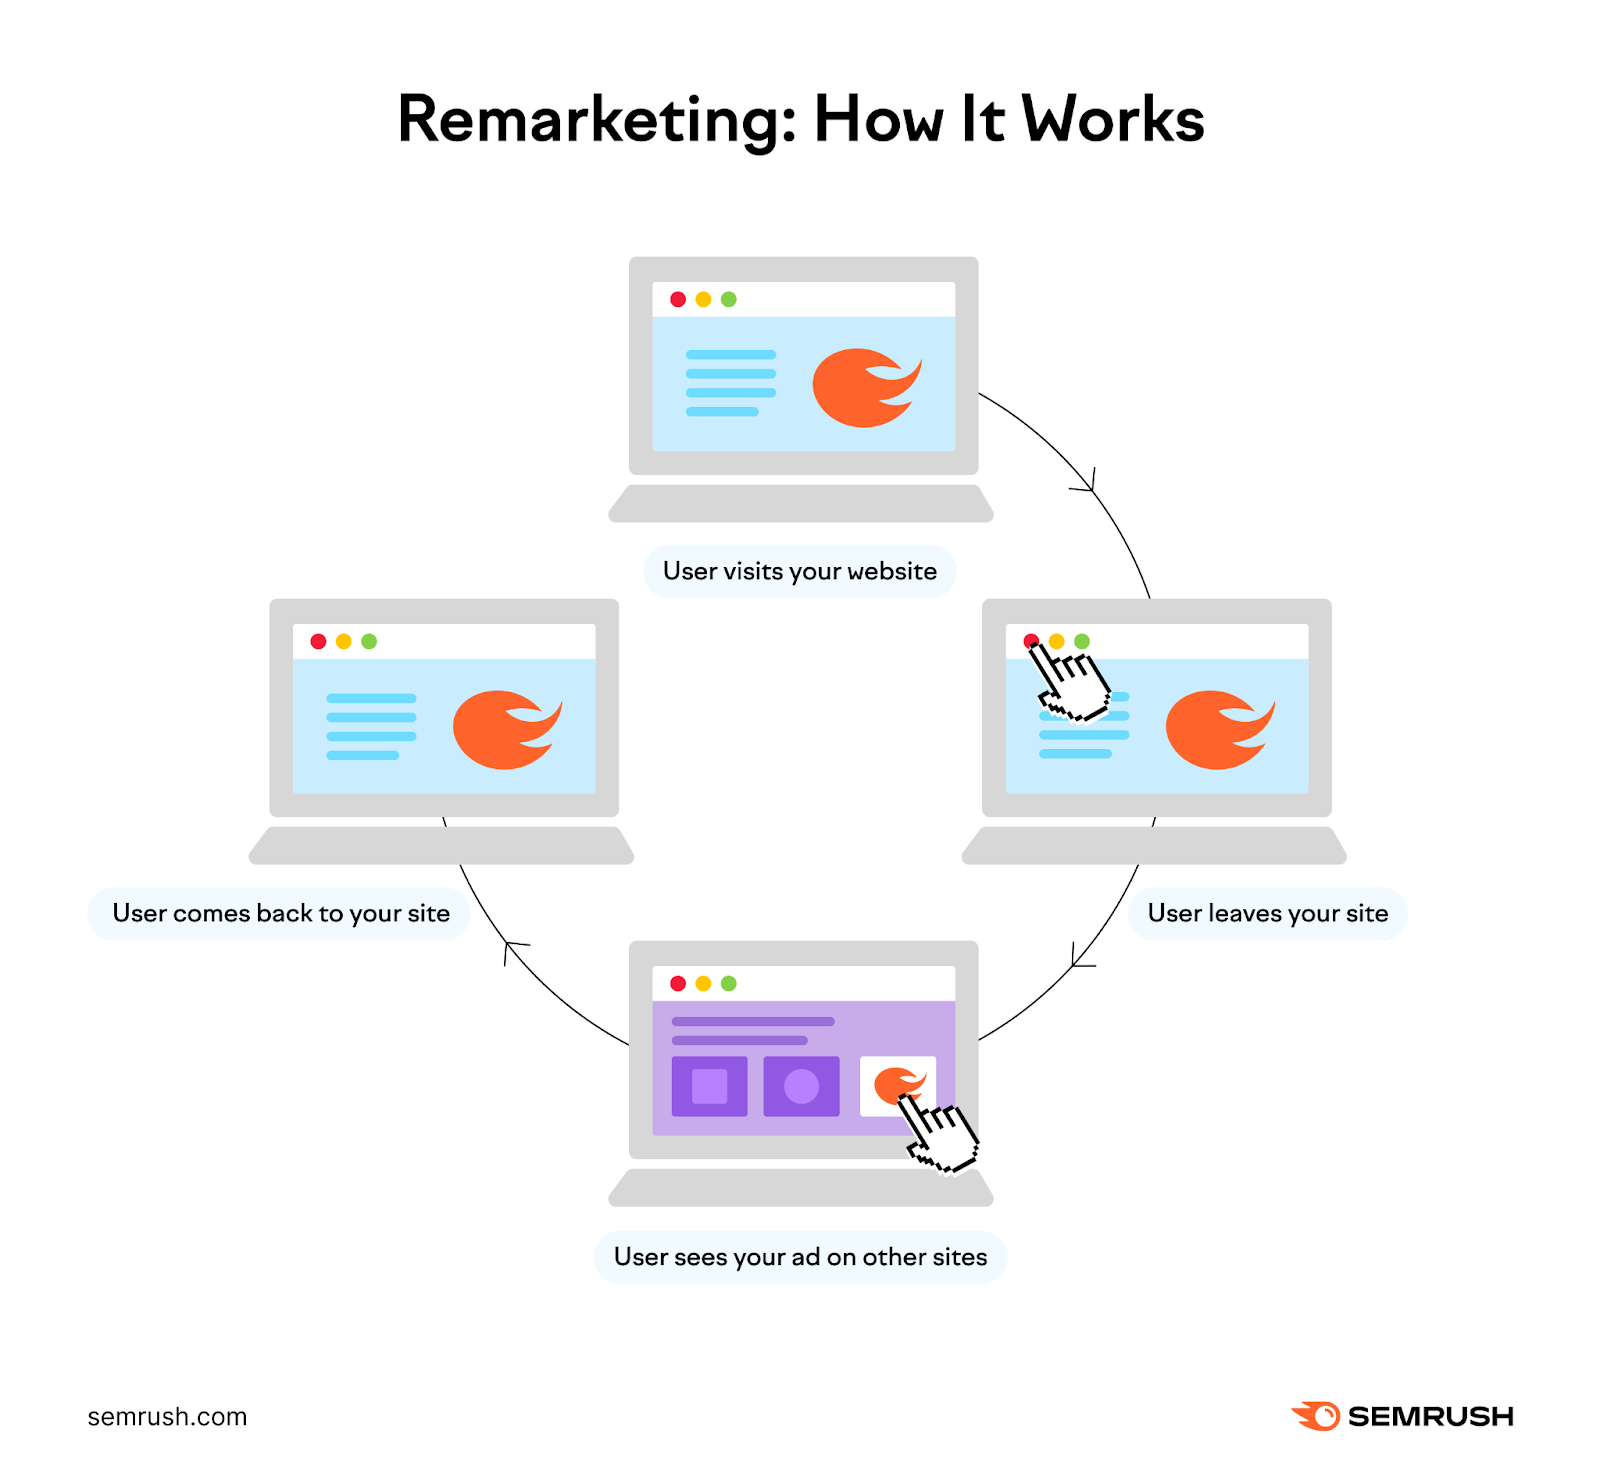 an infographic showing how remarketing works